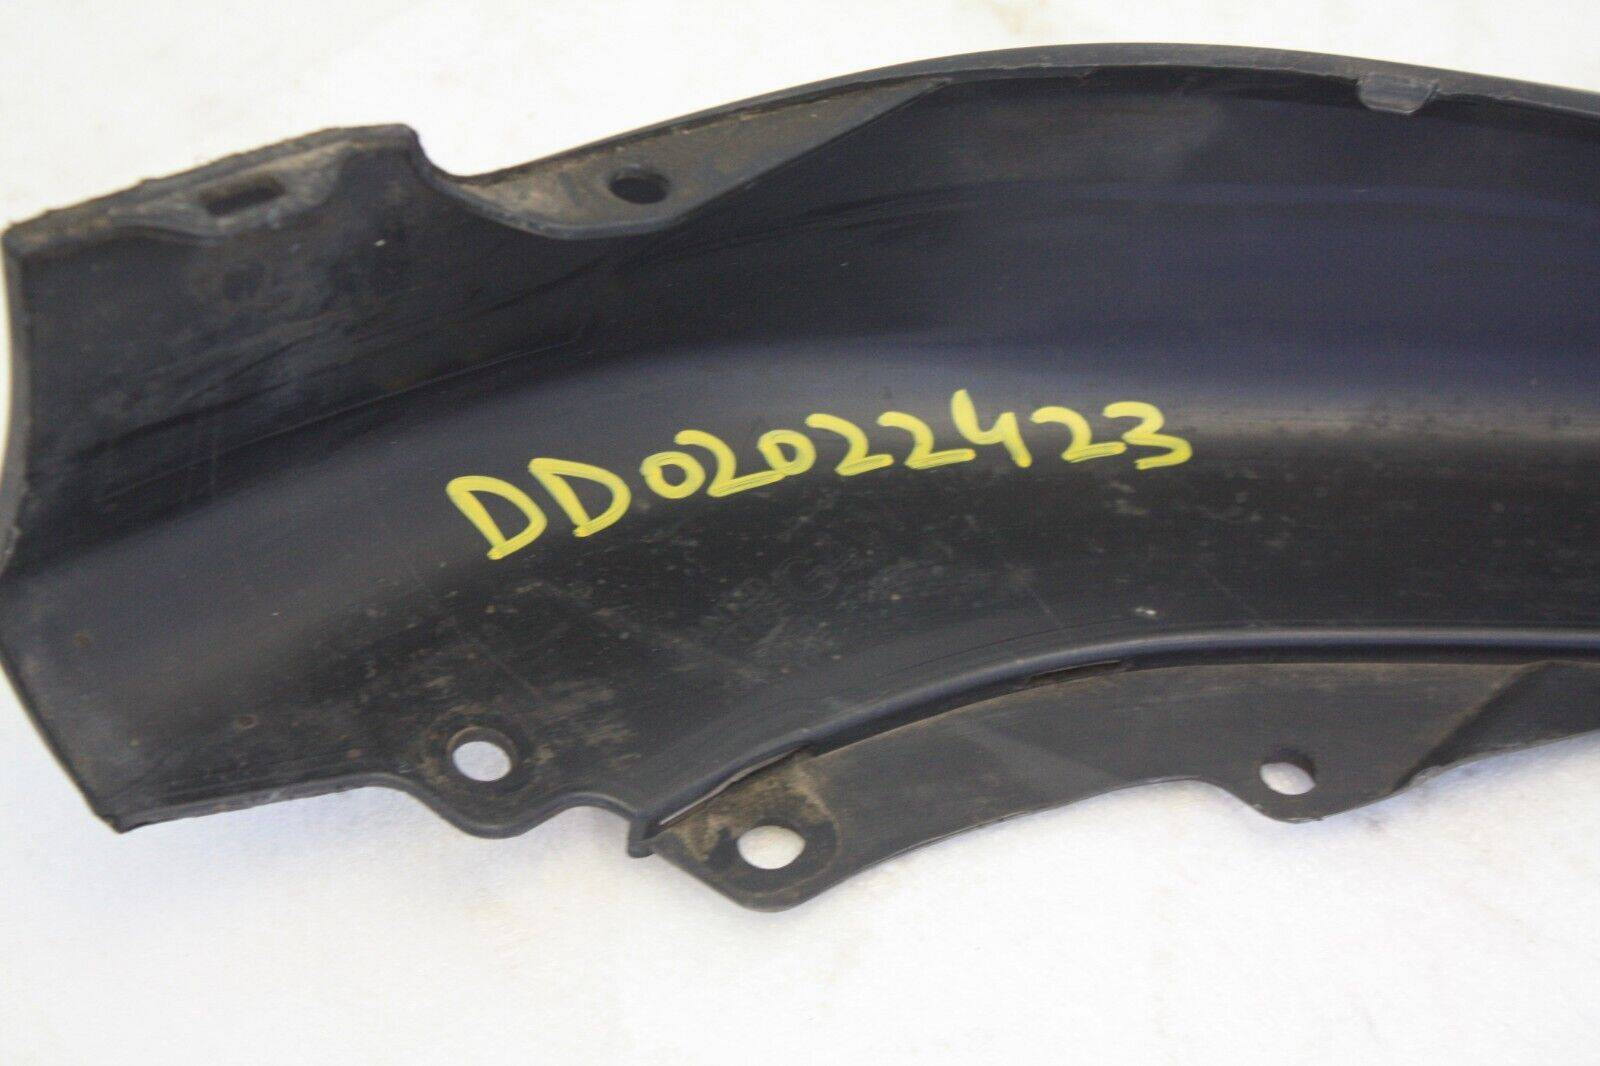 Honda-HR-V-Front-Bumper-Lower-Section-2015-TO-2018-71102-T7W-A000-GOT-HOLES-176220686588-13